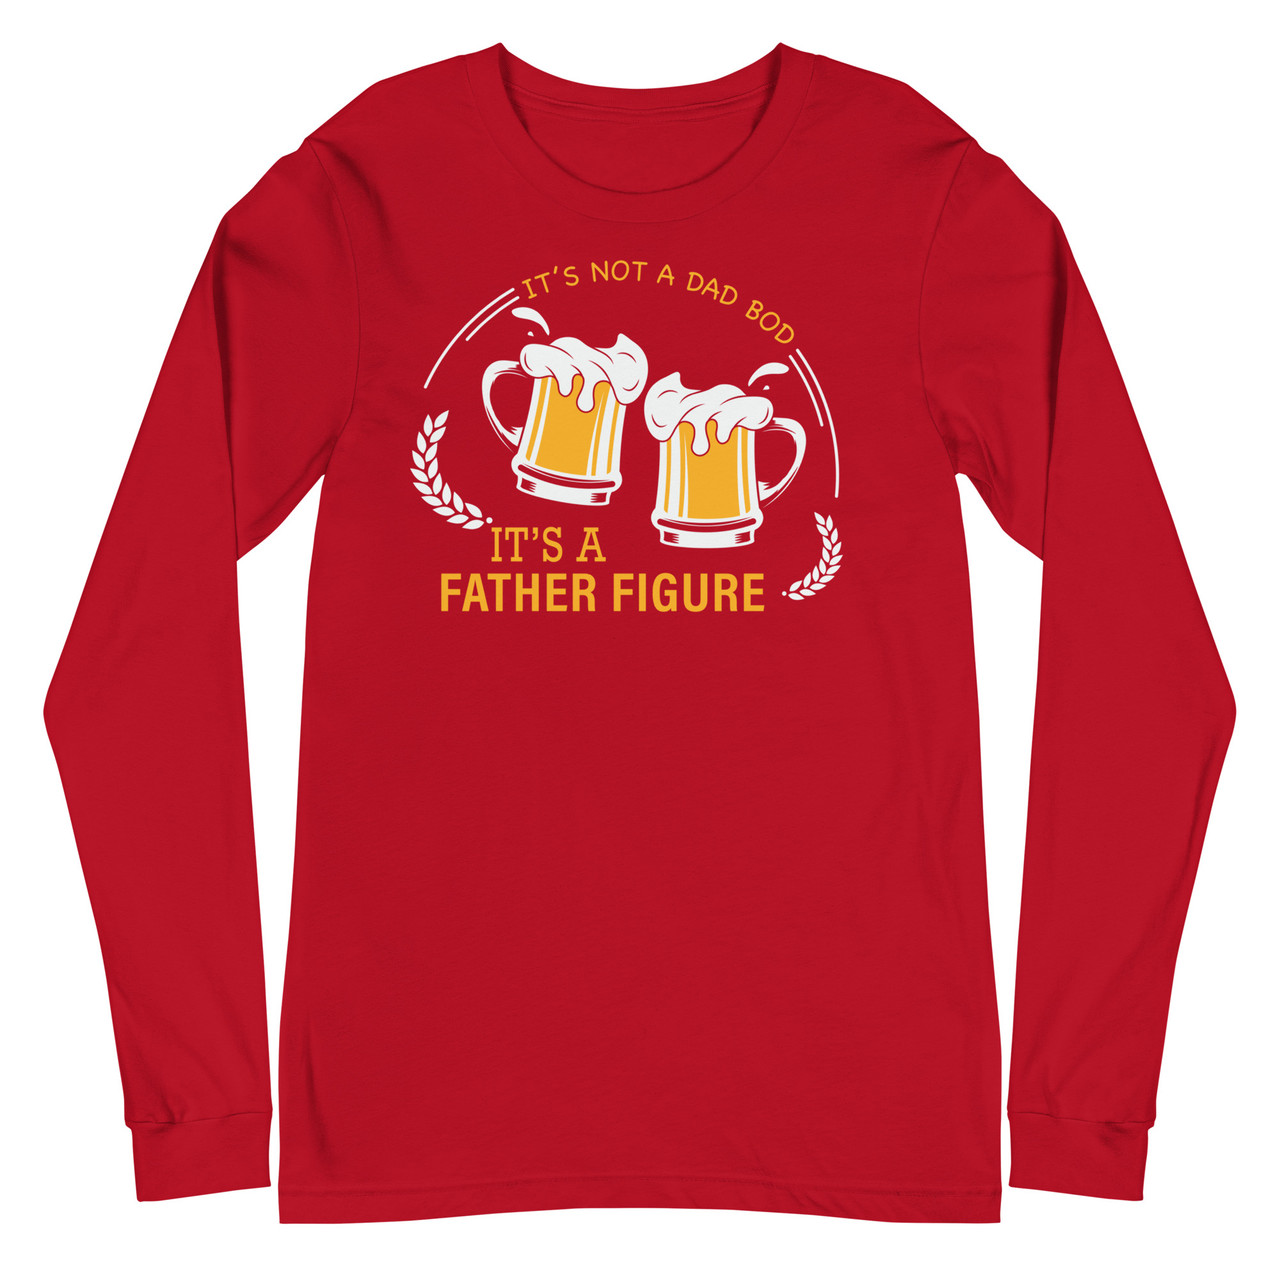 It's Not A Dad's Bod, It's A Father Figure Unisex Long Sleeve Tee - Bella + Canvas 3501 